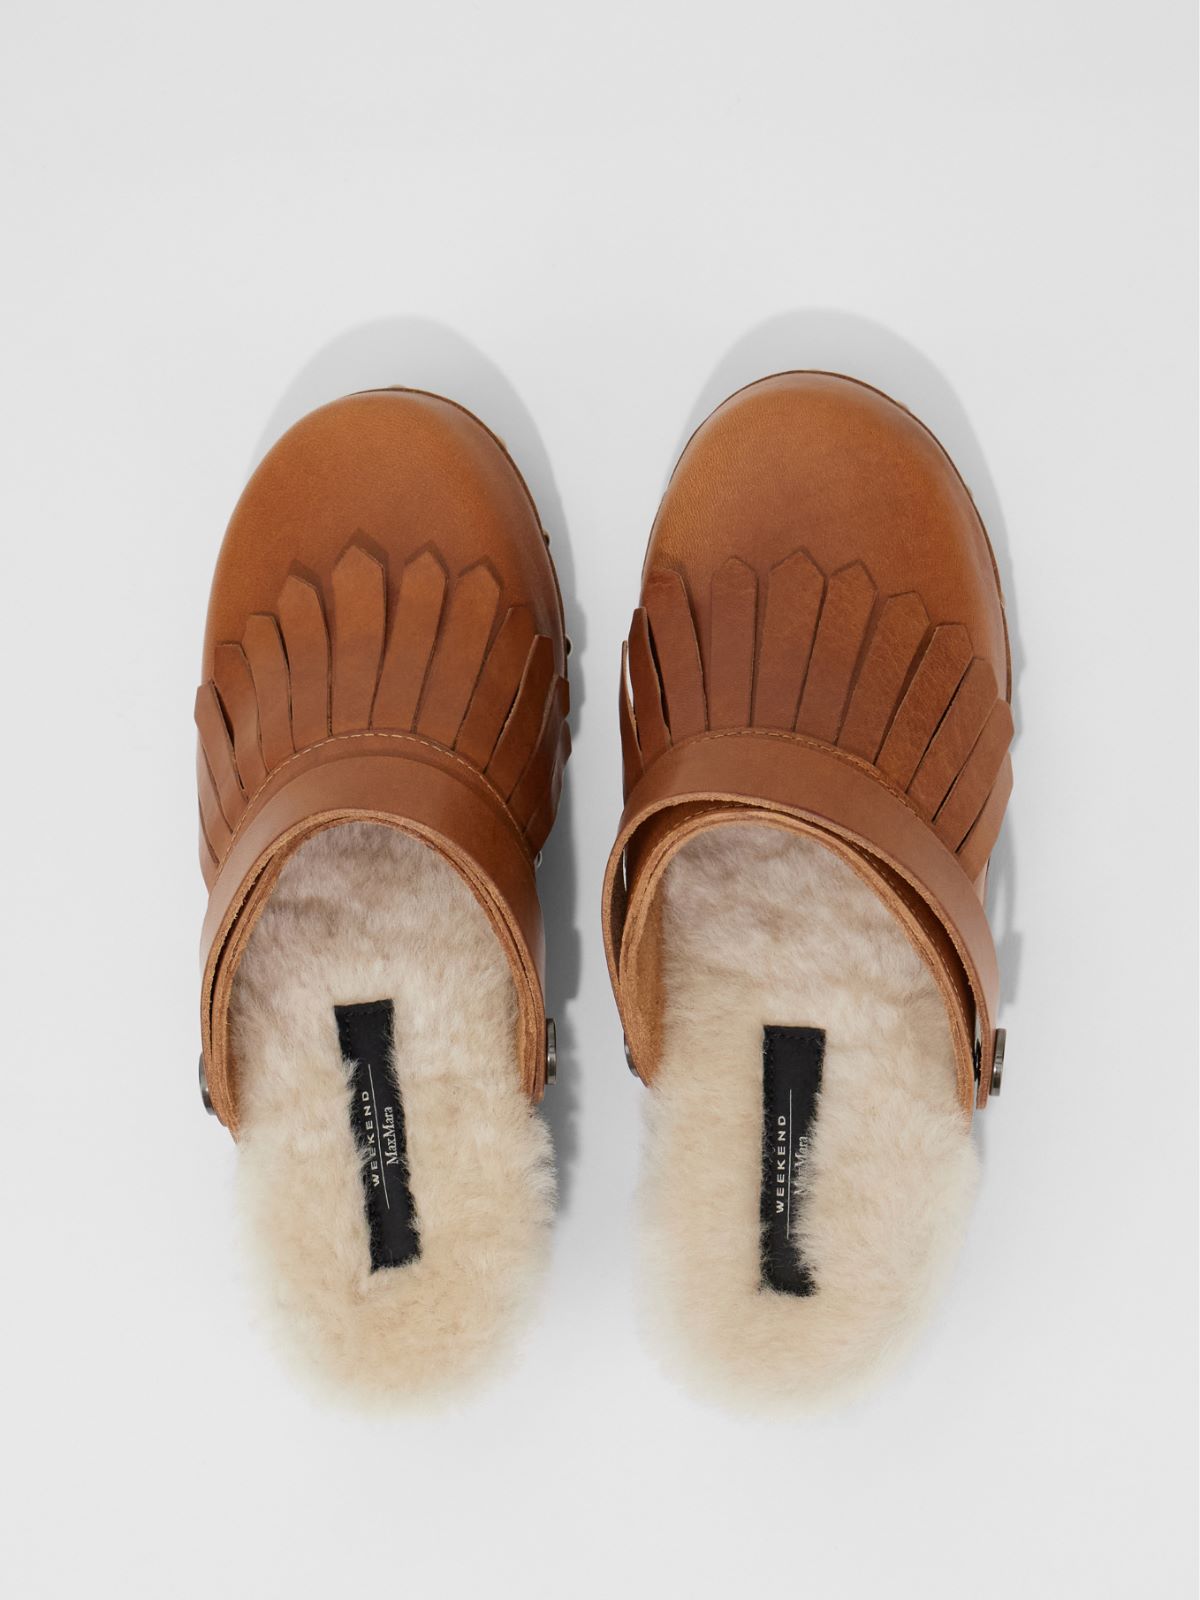 Leather and wood clogs Weekend Maxmara